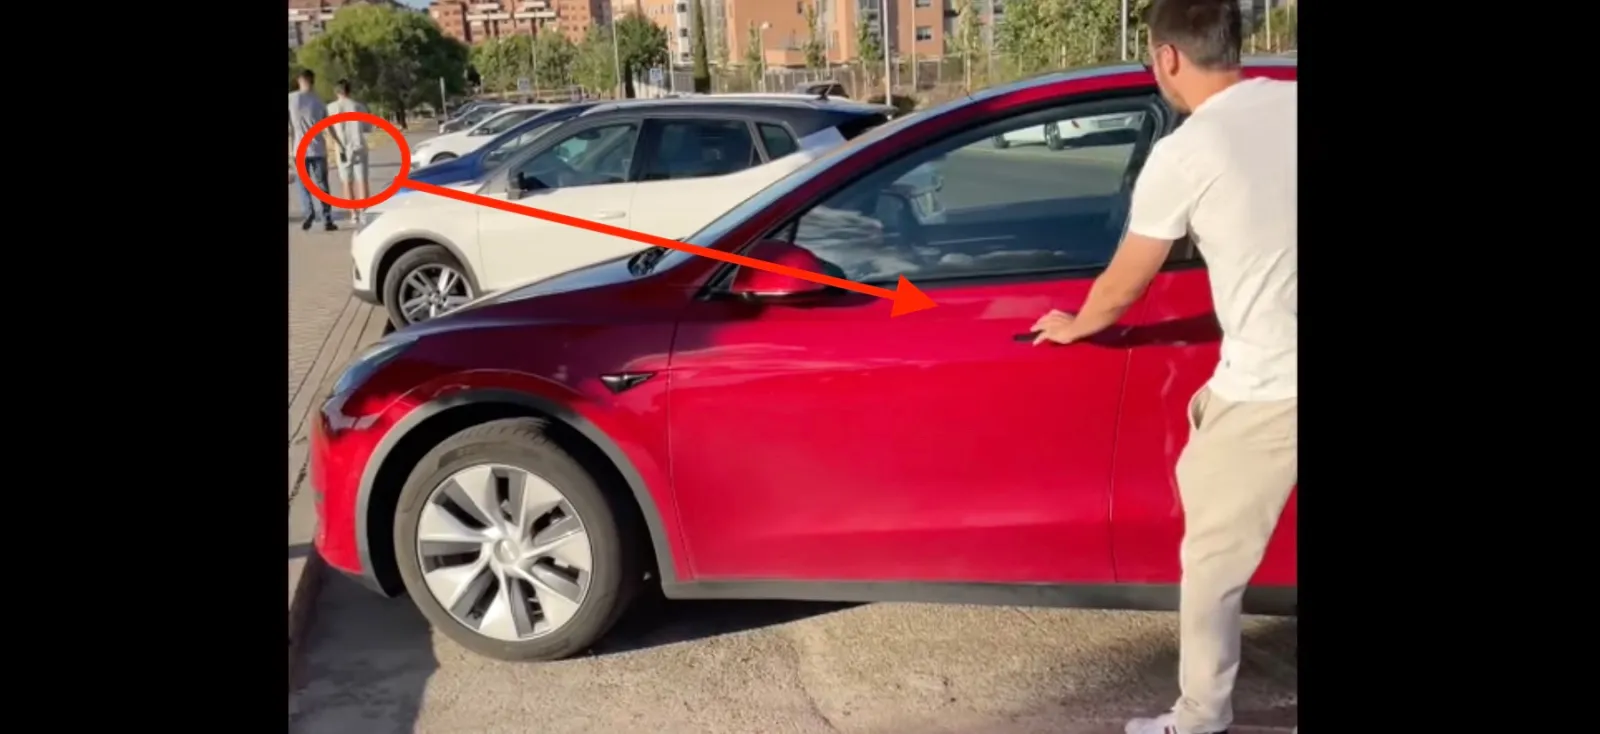 Why Are Teslas Still So Easy to Steal? Shocking Flaws in High-Tech Security Exposed!